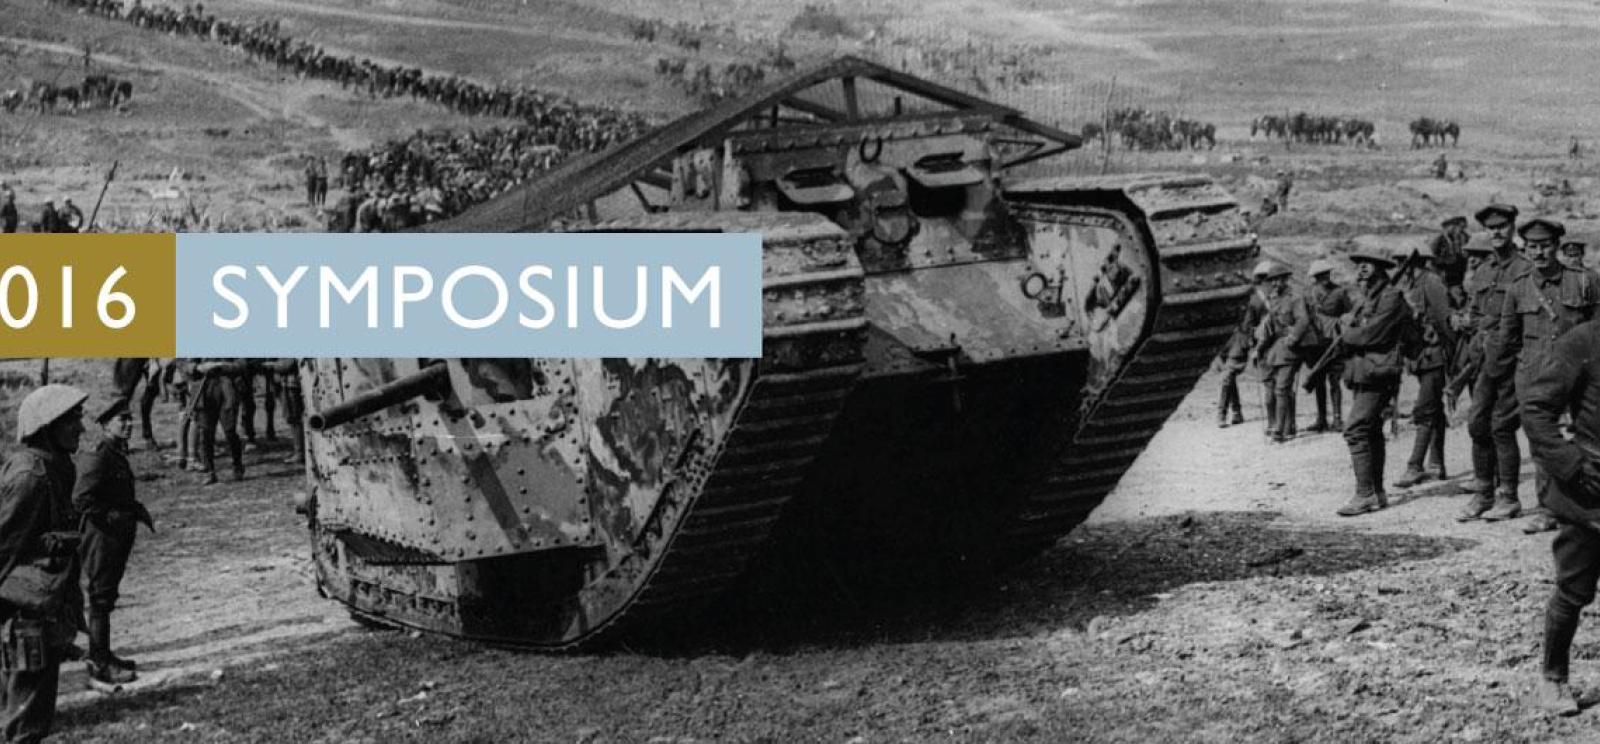 Background image: black and white photo of a tank surrounded by soldiers looking at it in a field. Text: 2016 Symposium